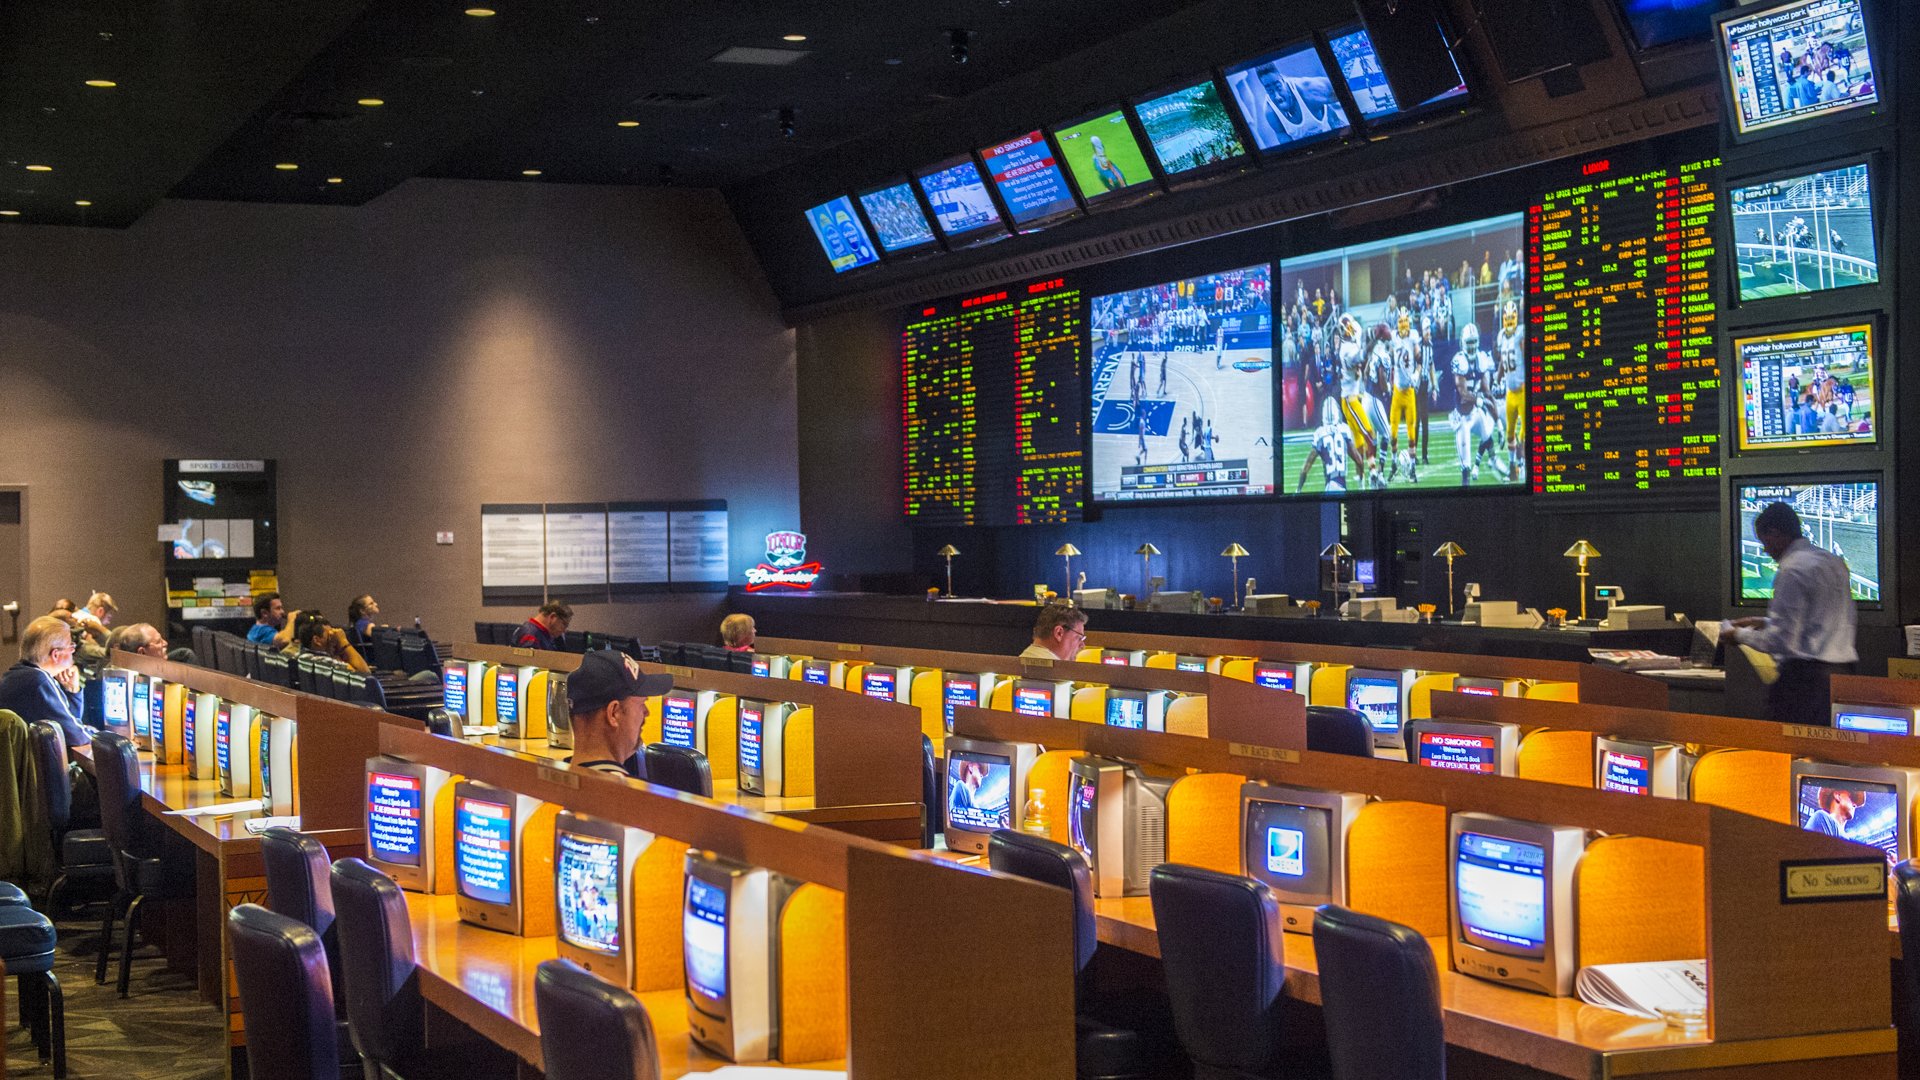 The Top Betting Sites and Wager Options for Super Bowl LV